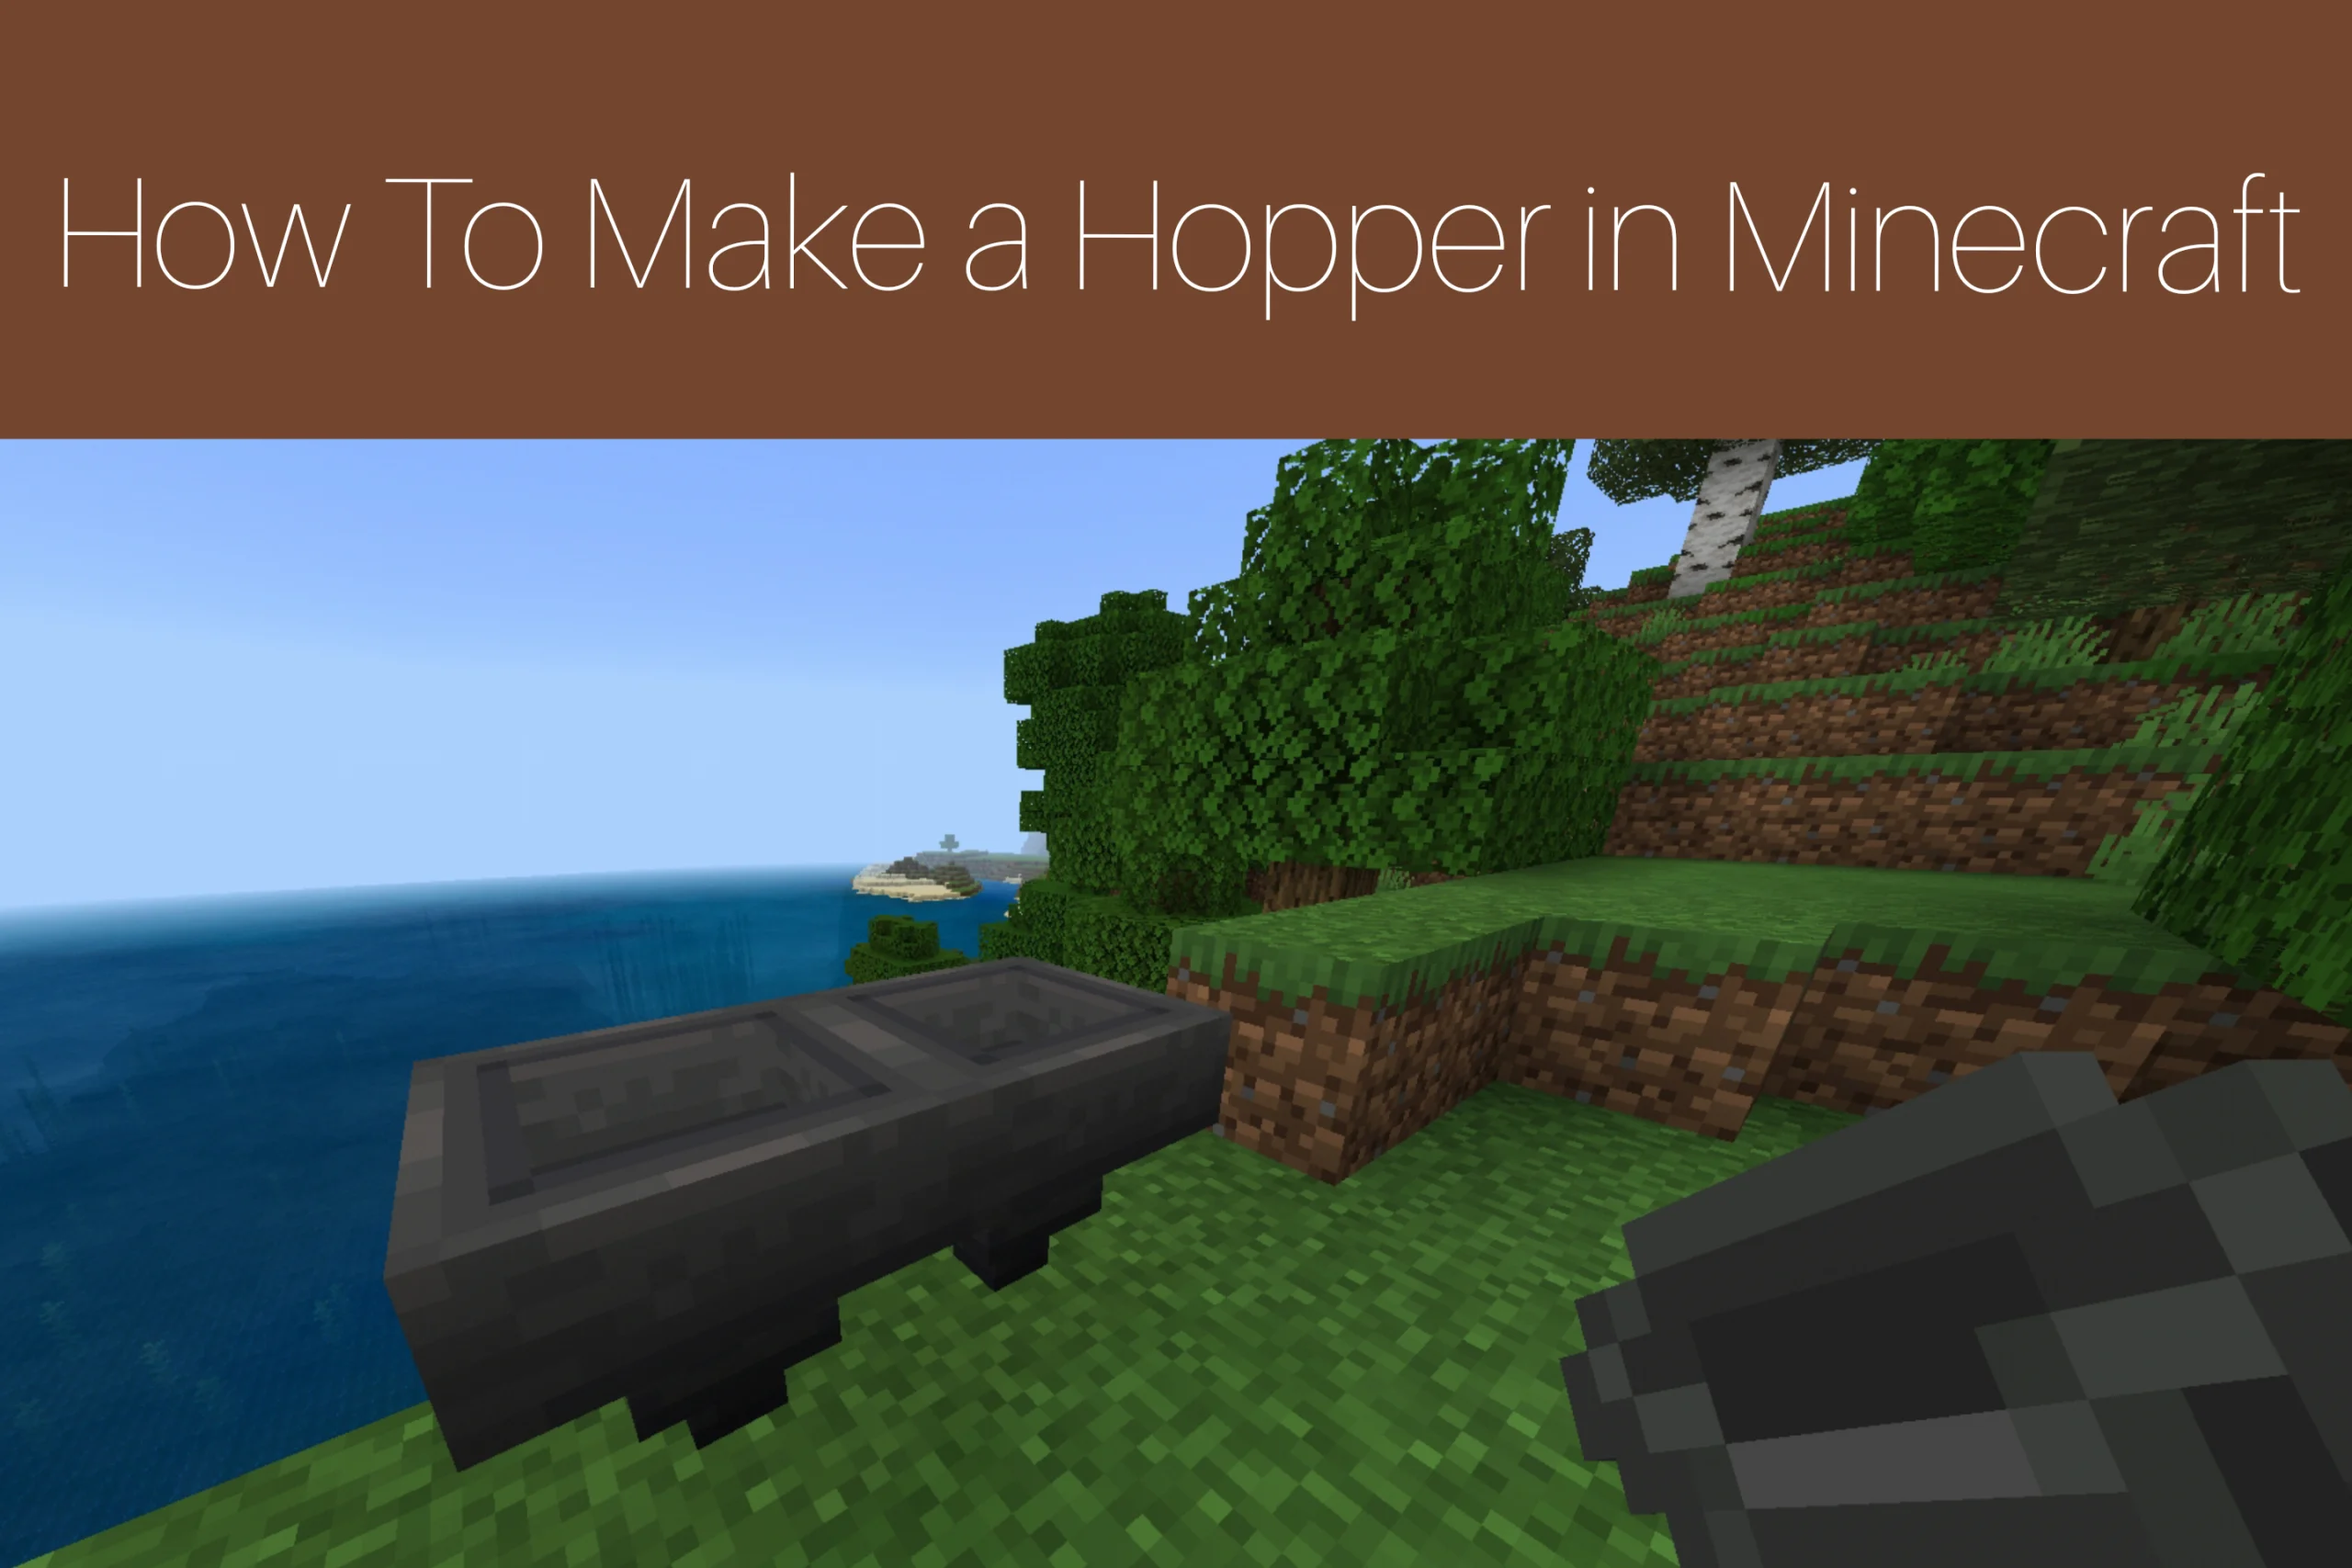 How To Make a Hopper in Minecraft